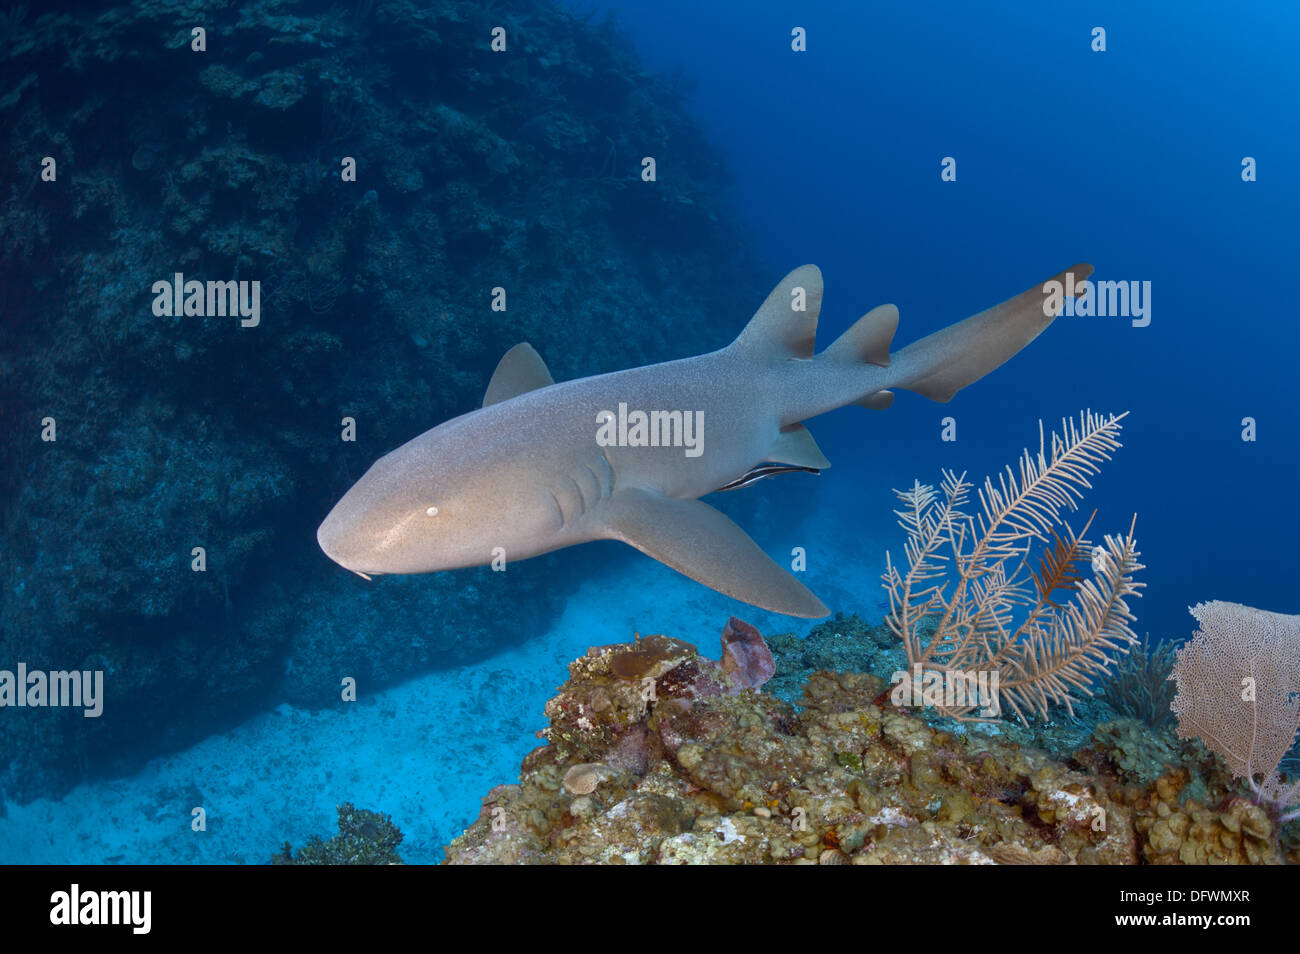 Wild nurse shark (Ginglymostoma cirratum) swims during the day at Mesoamerican barrier reef. Stock Photo